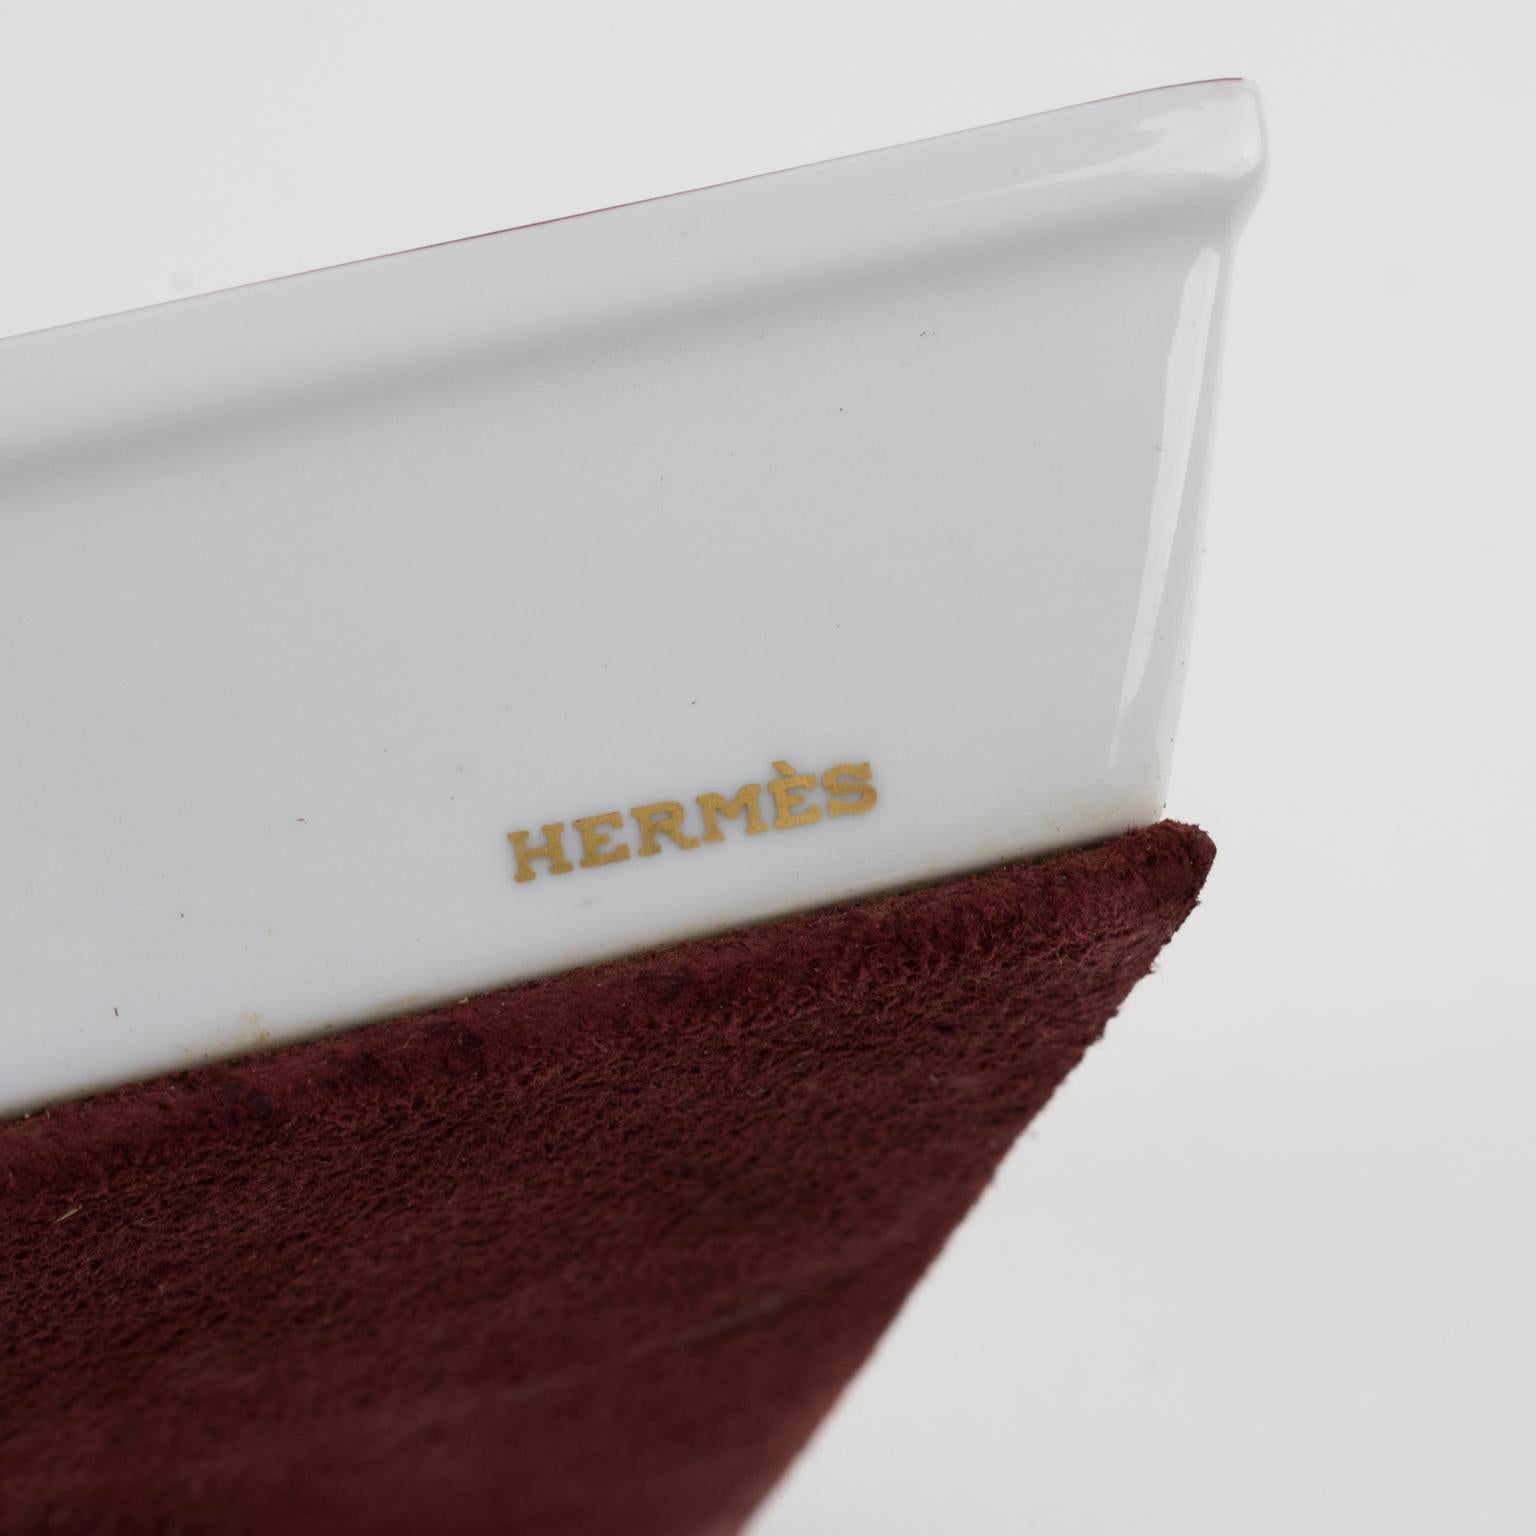 Hermes Paris White and Burgundy-Red Limoges Porcelain Picture Frame 1